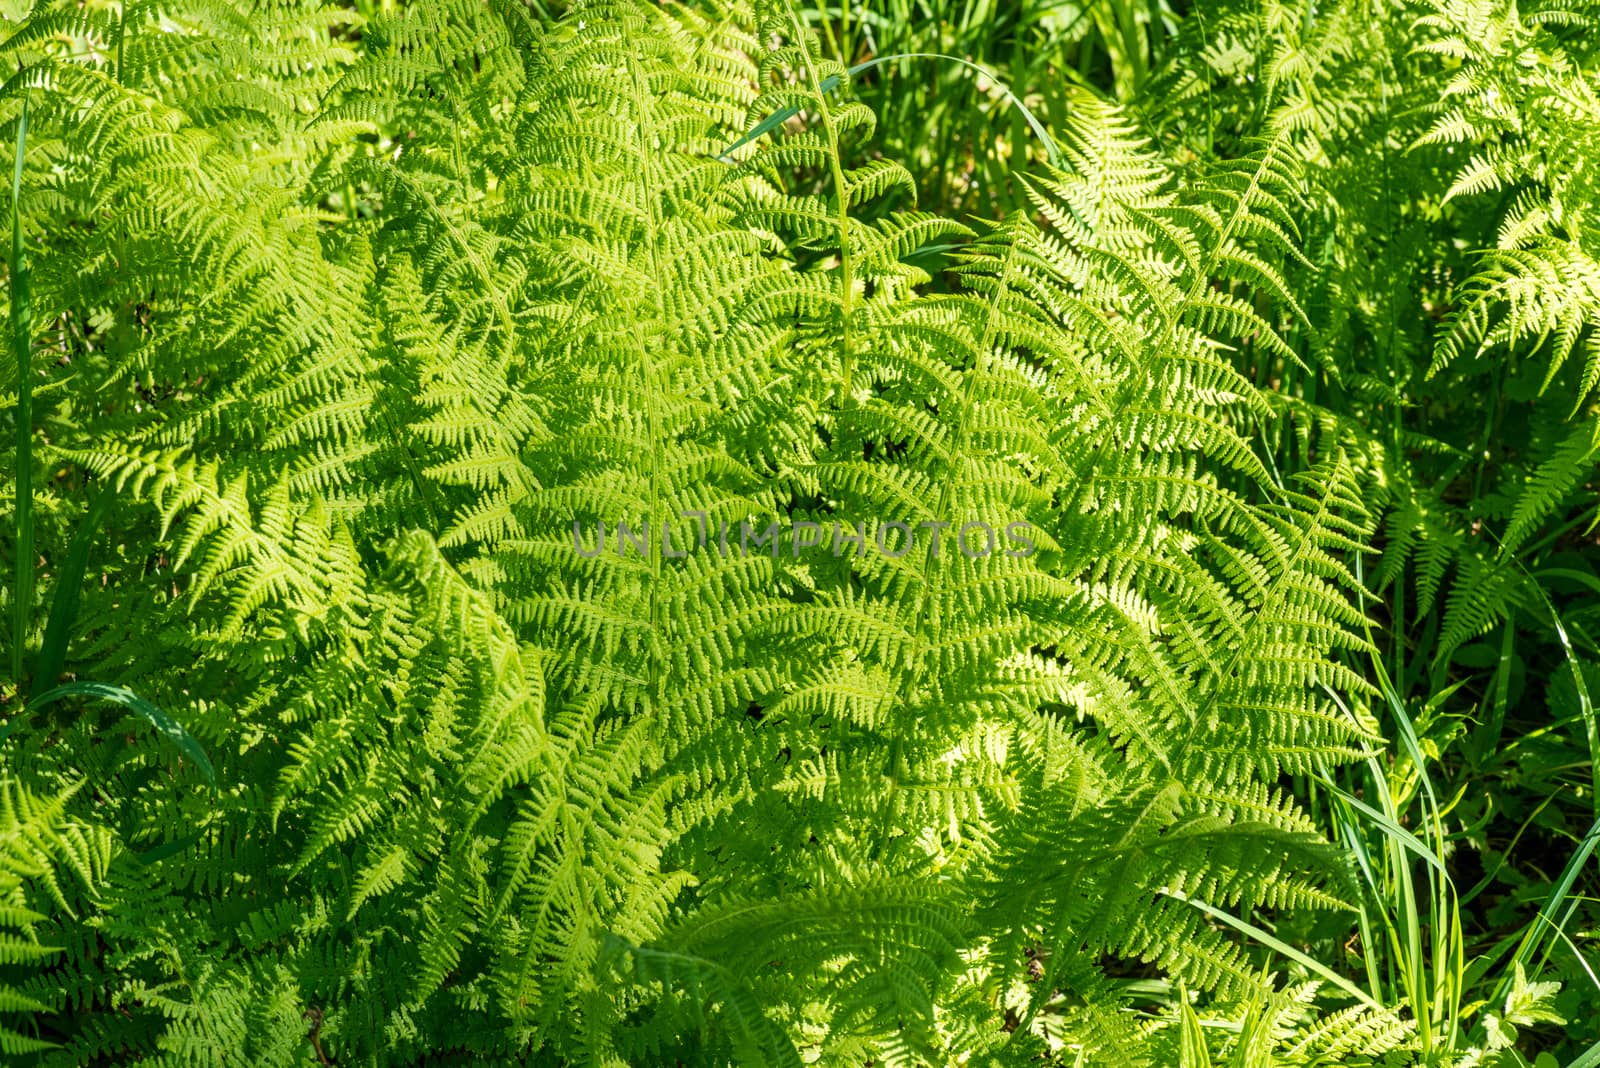 Natural fern leaf cover closeup photo. Tropical greenery top view. Fern leaf pattern. Green foliage with green fern leaf. Summer greenery background photo. Exotic plant in garden banner template